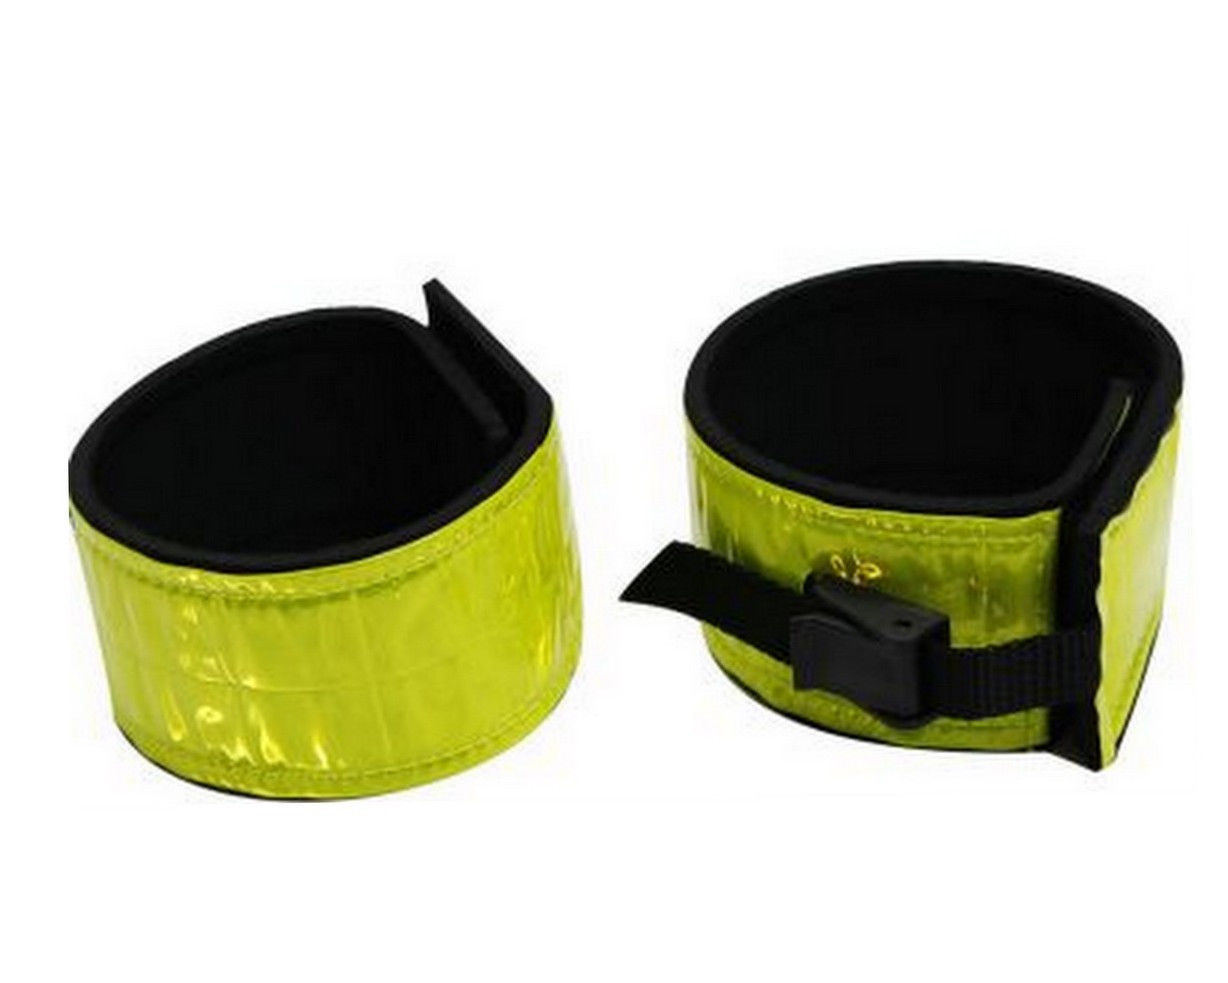 2 Reflective Safety Leg Arm Bands for Horse People Rider Joggers Bicycle Riders - $14.70